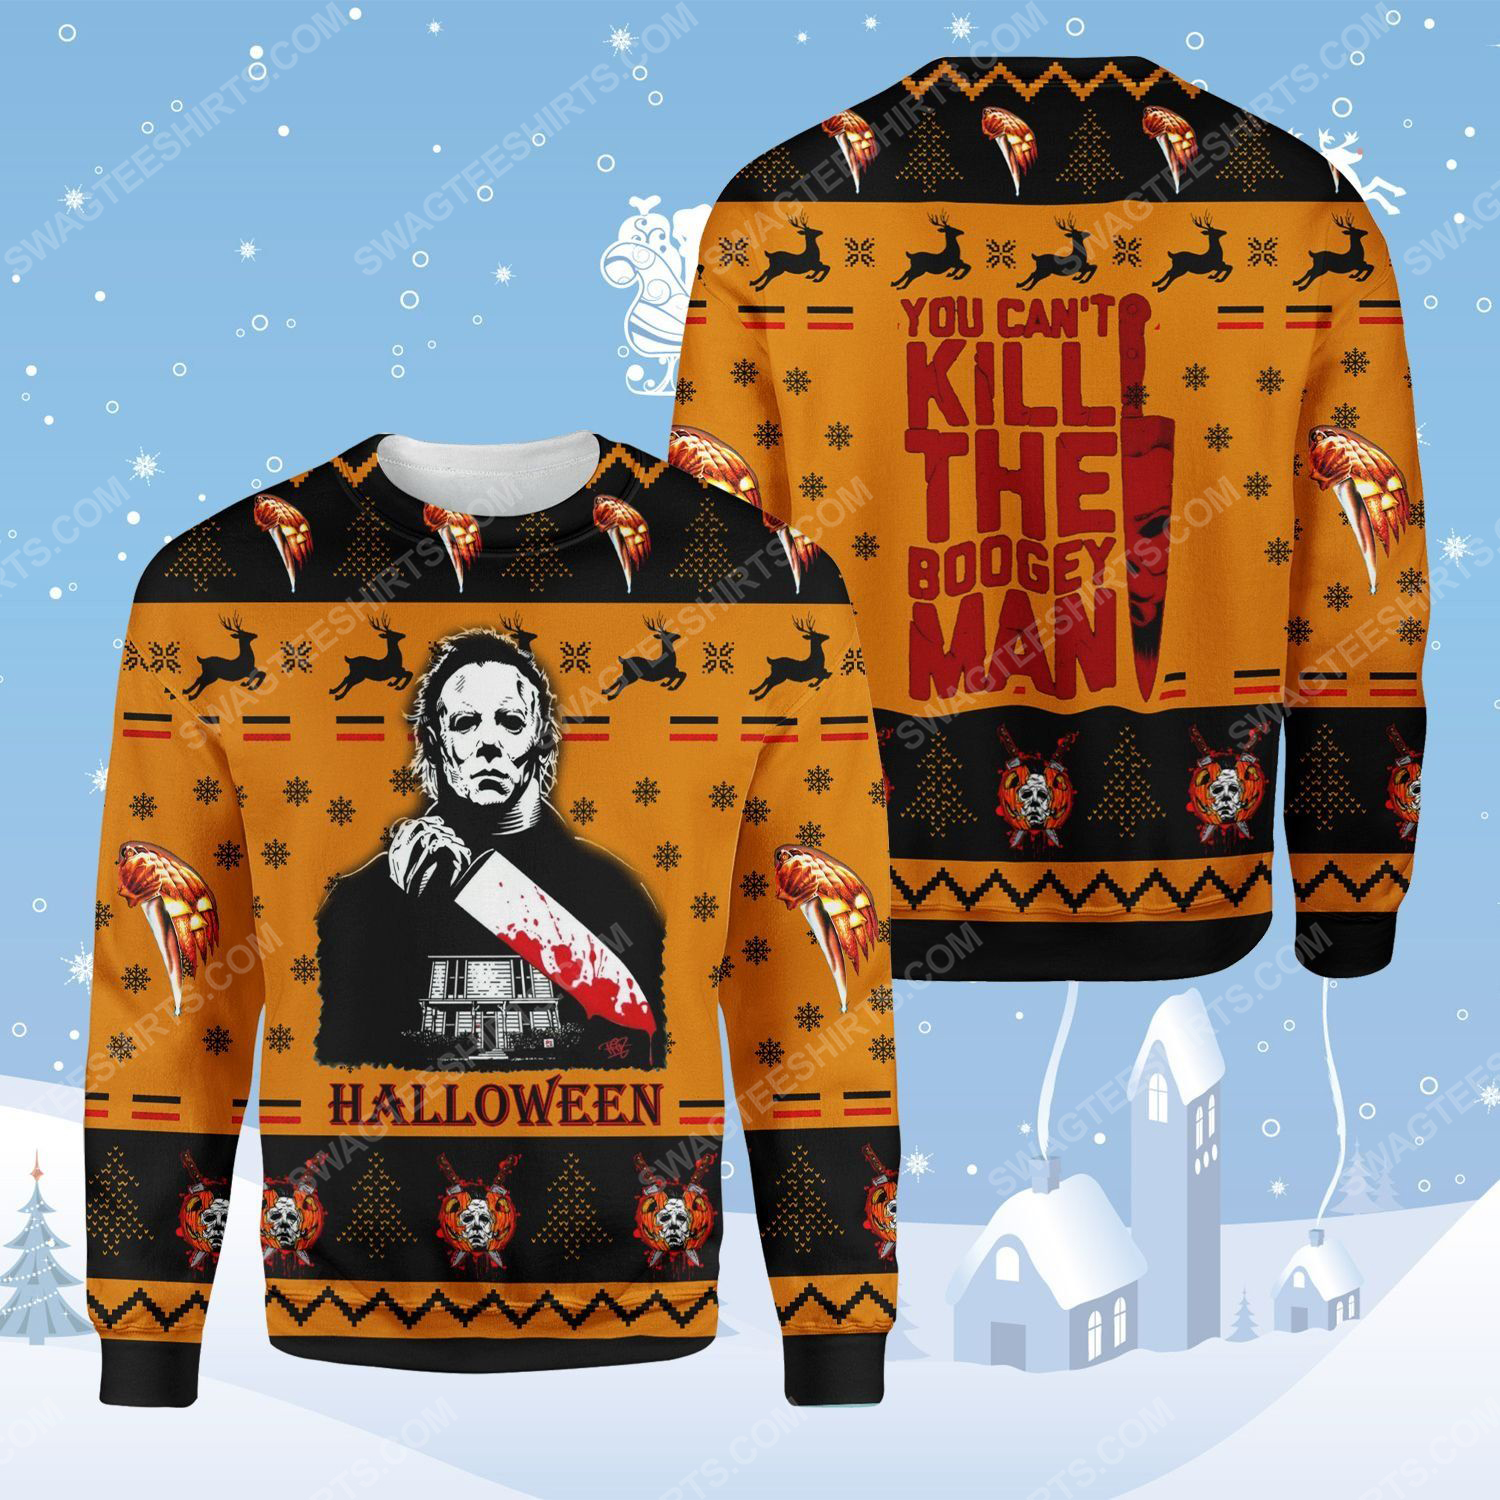 Halloween michael myers you can't kill the bogeyman ​ugly christmas sweater - Copy